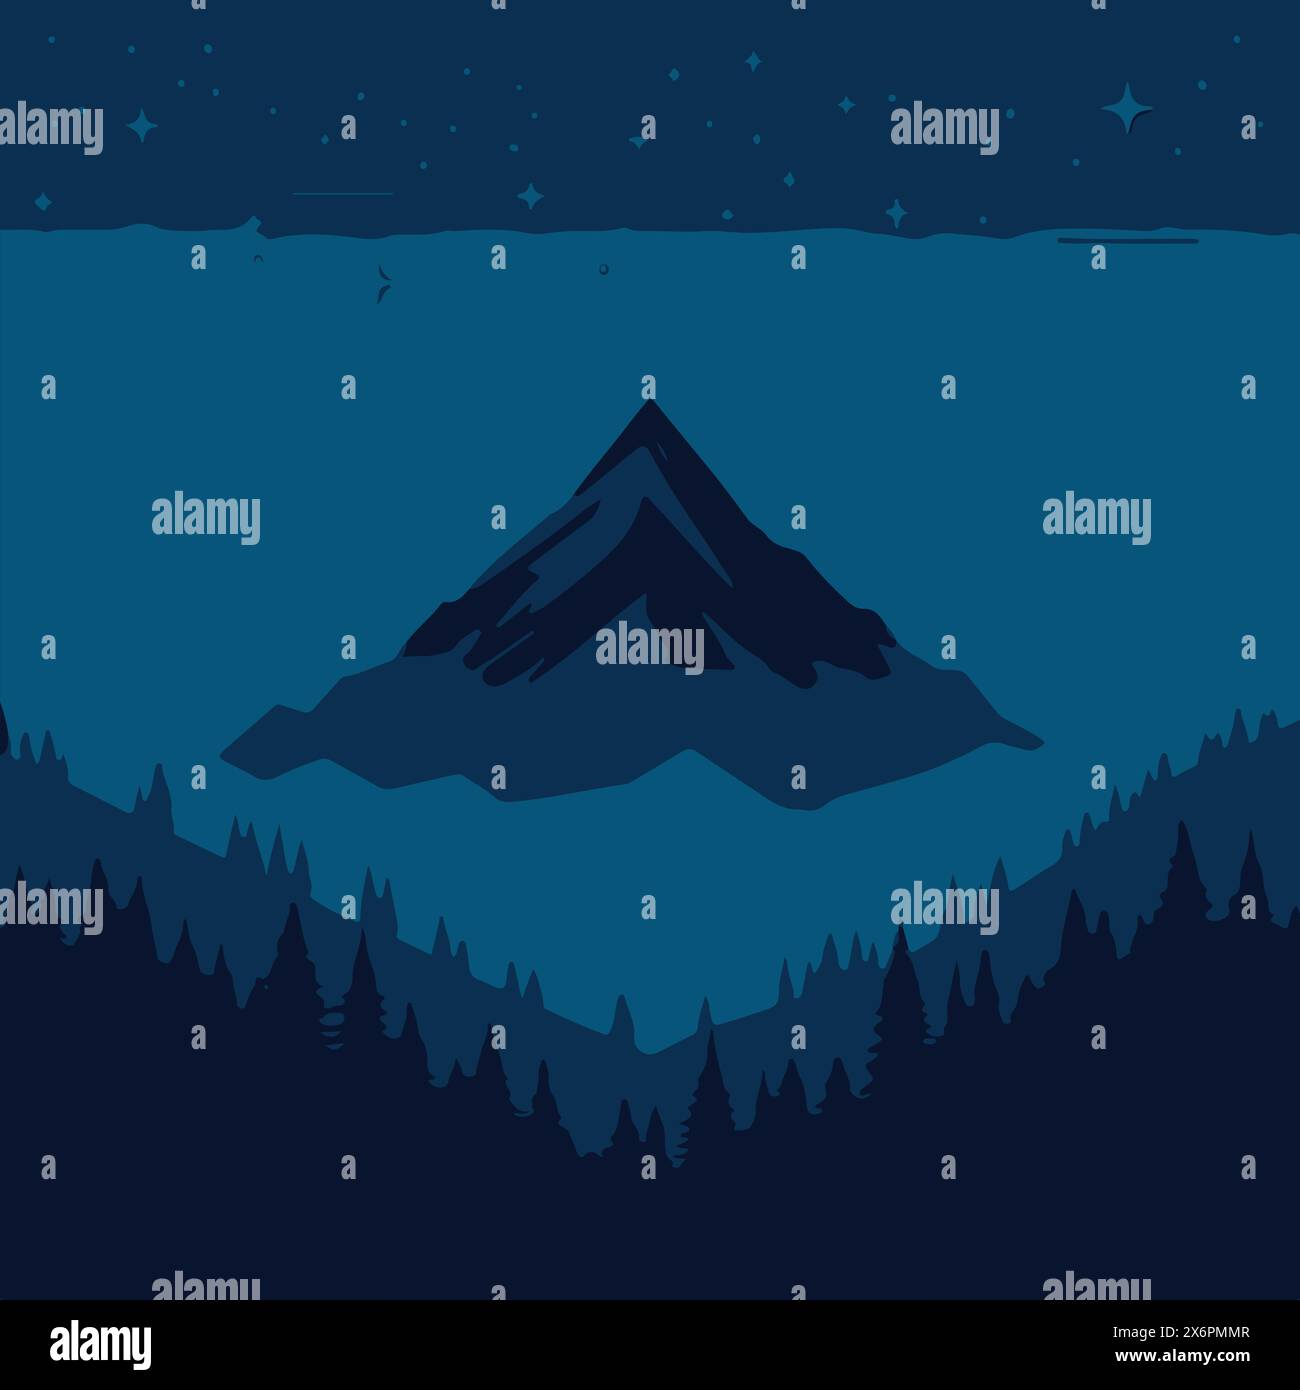 Mountain Silhouettes Vector Illustrations: Capturing the Tranquil Beauty of Nature at Twilight Stock Vector